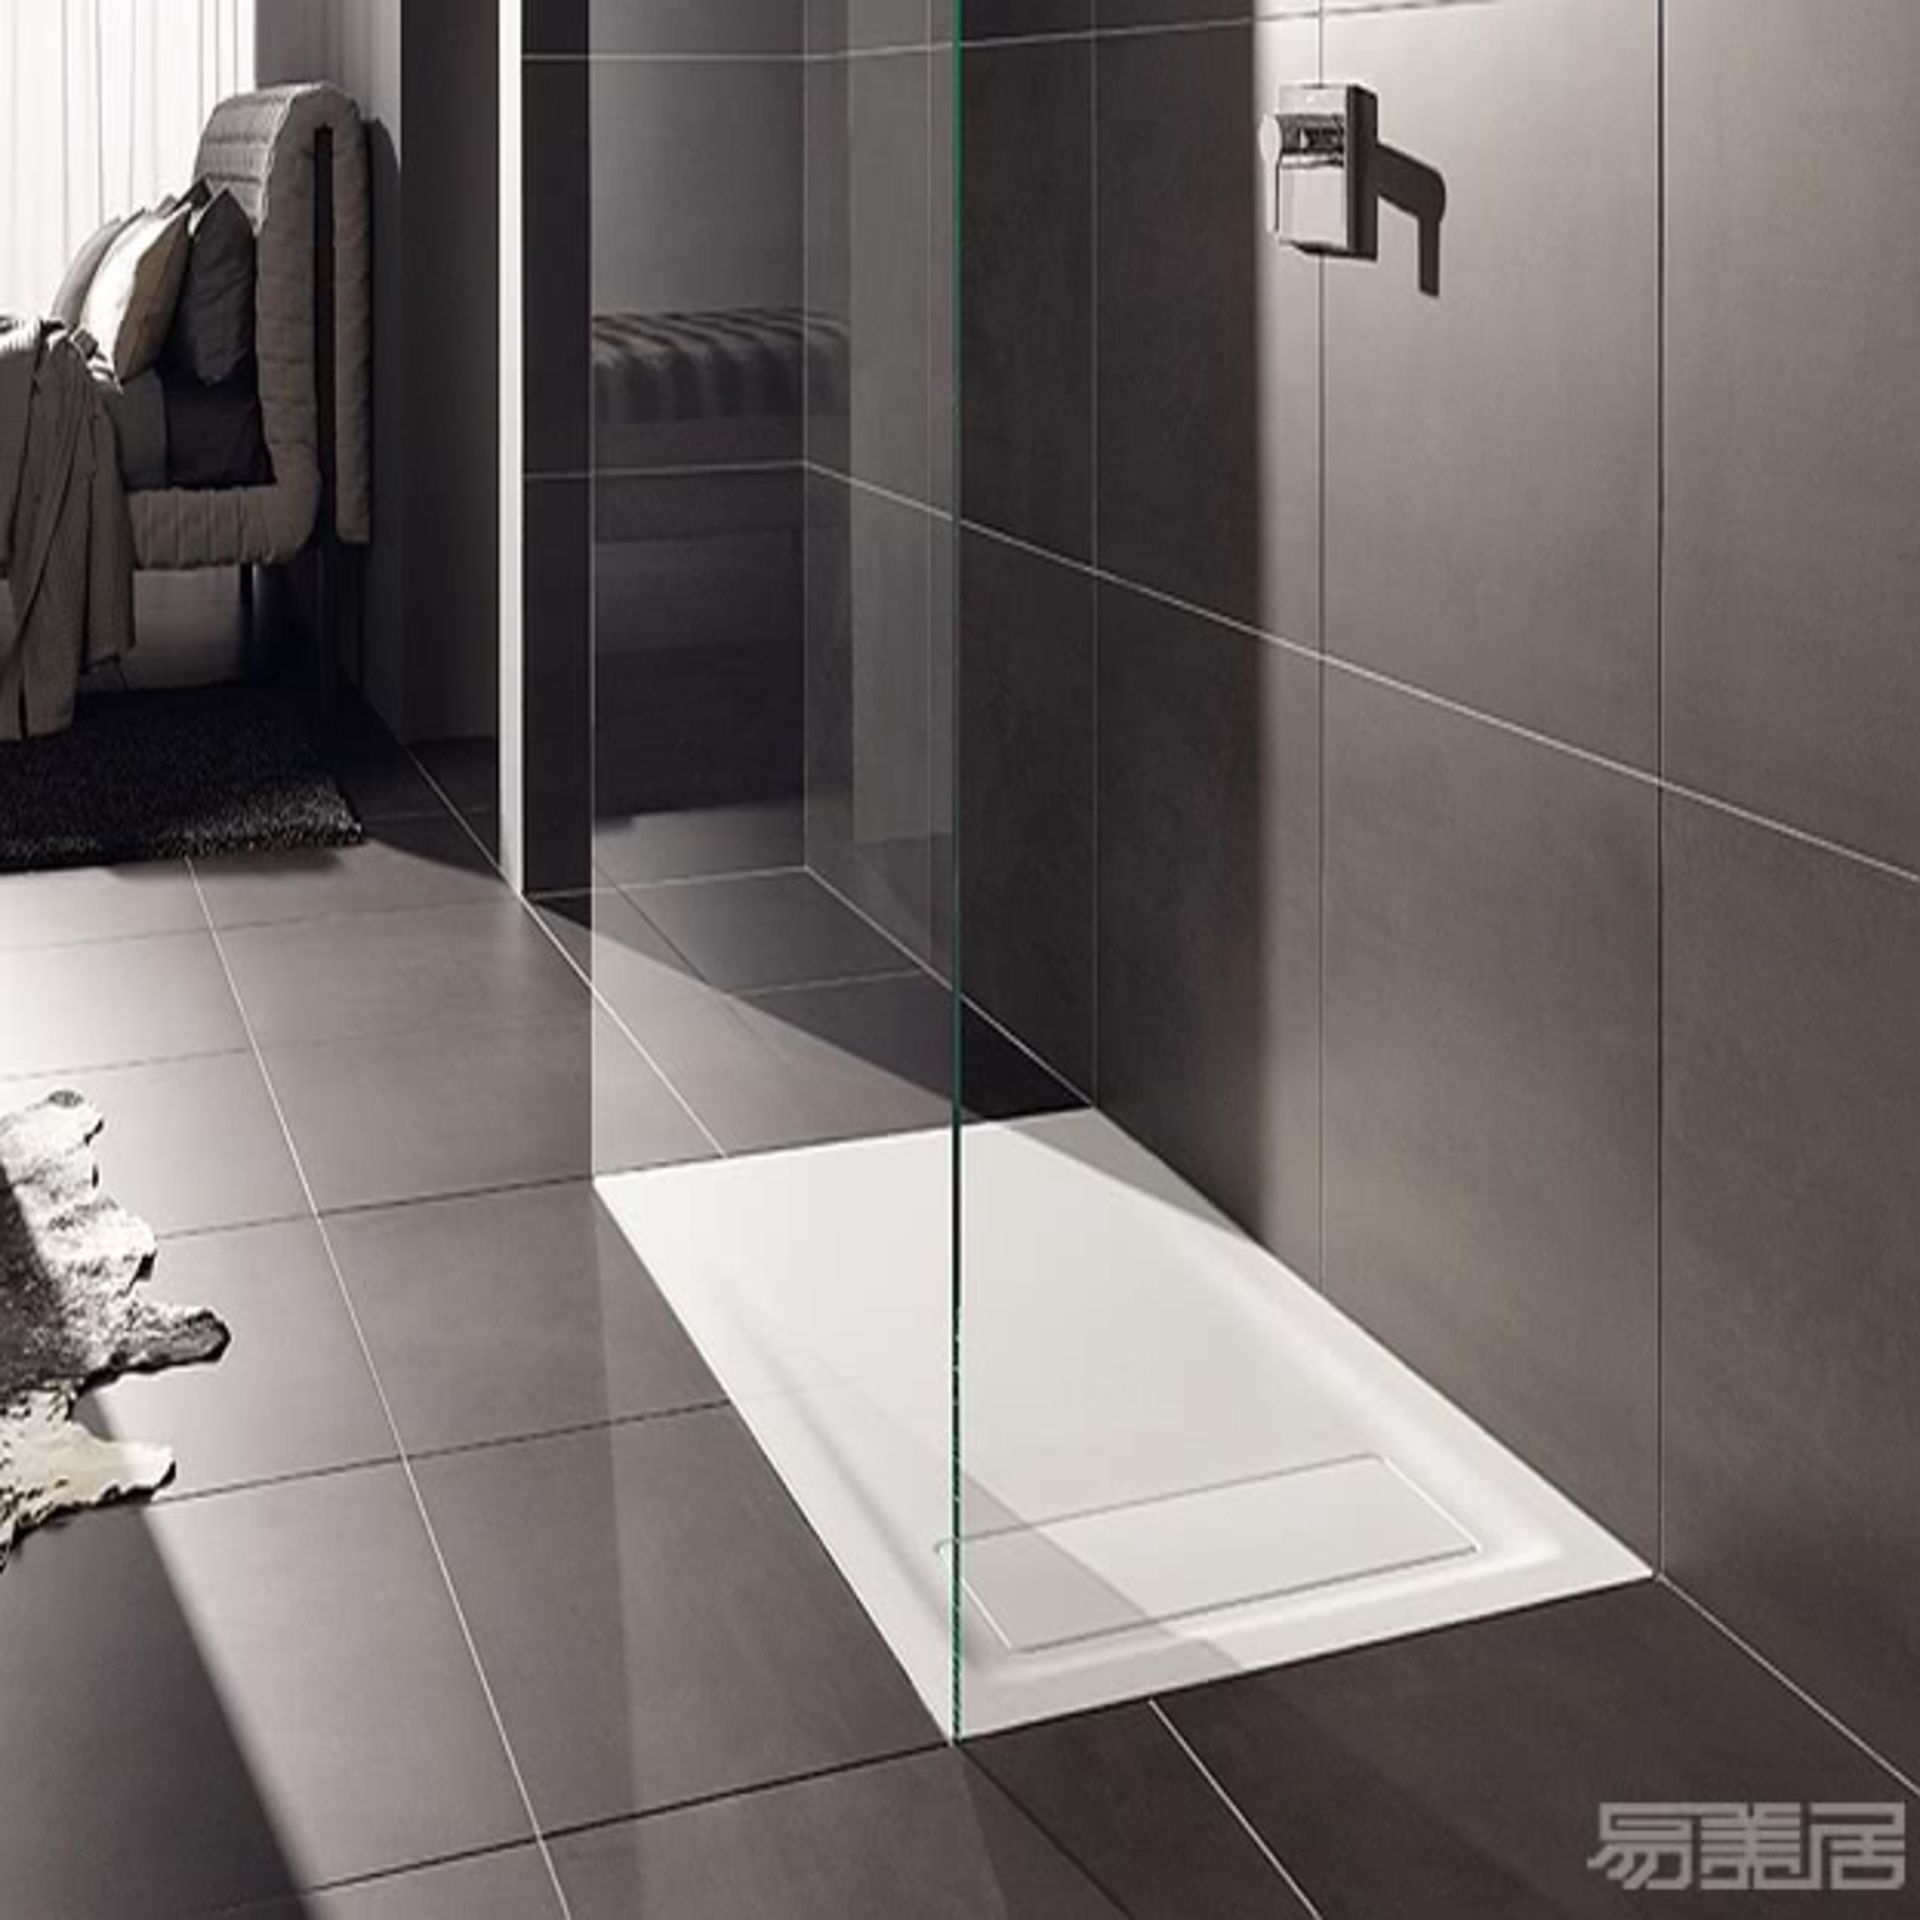 (VD146) Keramag 1400x900mm Opale White Shower Tray. RRP £1,285.99.Opale is sober, slender and...